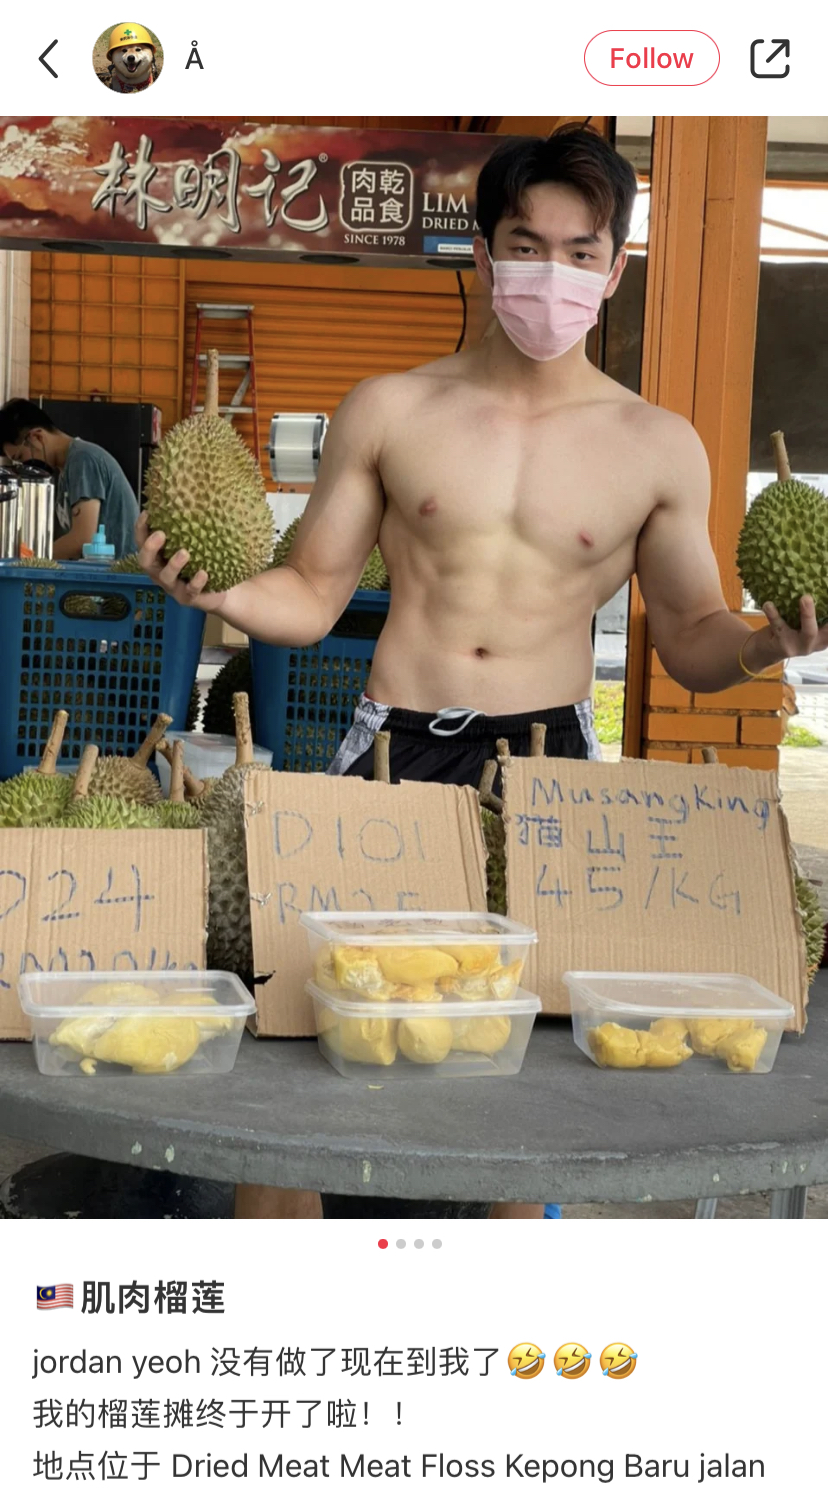 19yo durian seller sends the internet drooling with shirtless photo